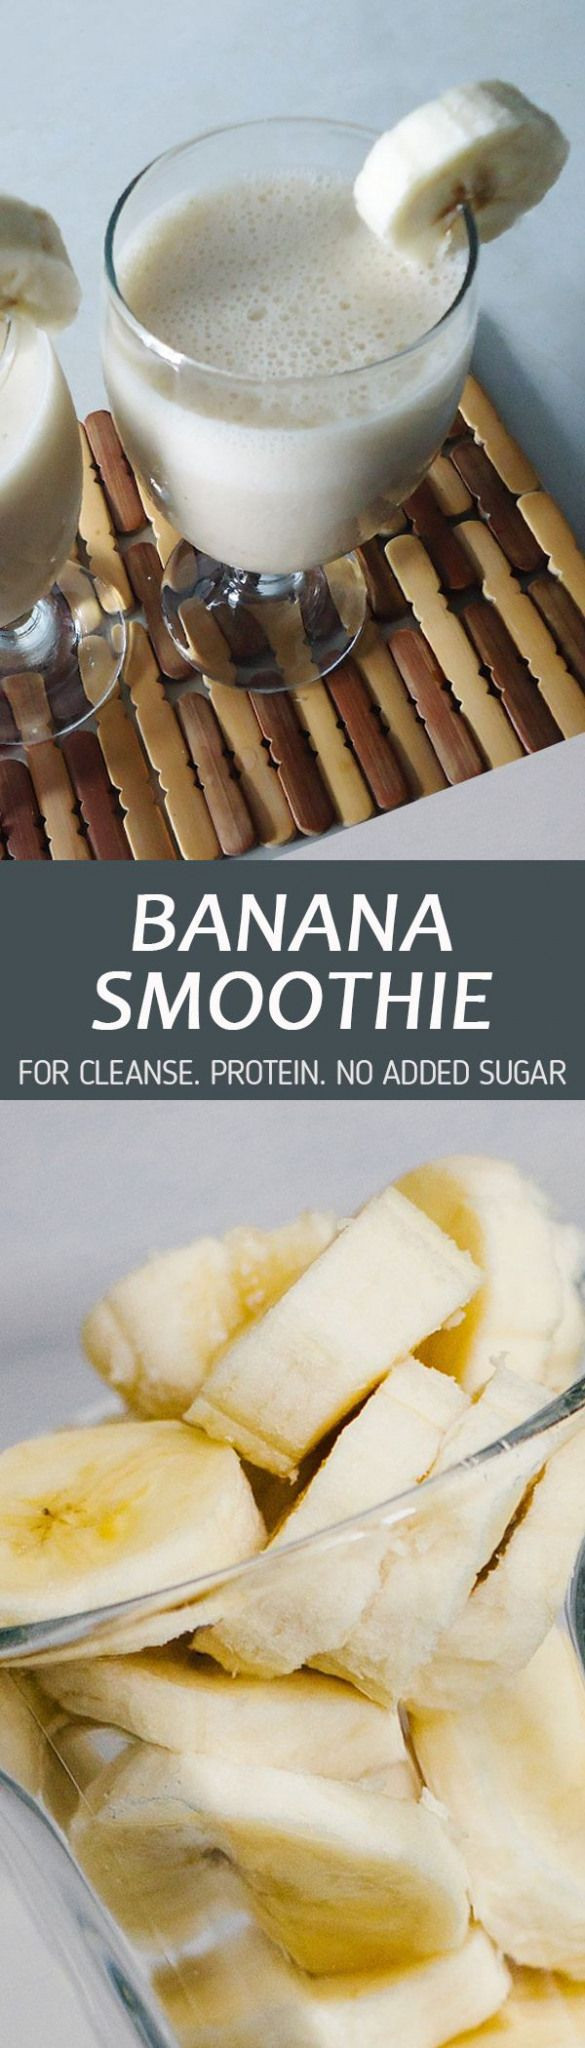 High Fiber Smoothie Recipes Weight Loss
 FREE GUIDE smoothies for cleansing smoothie treats